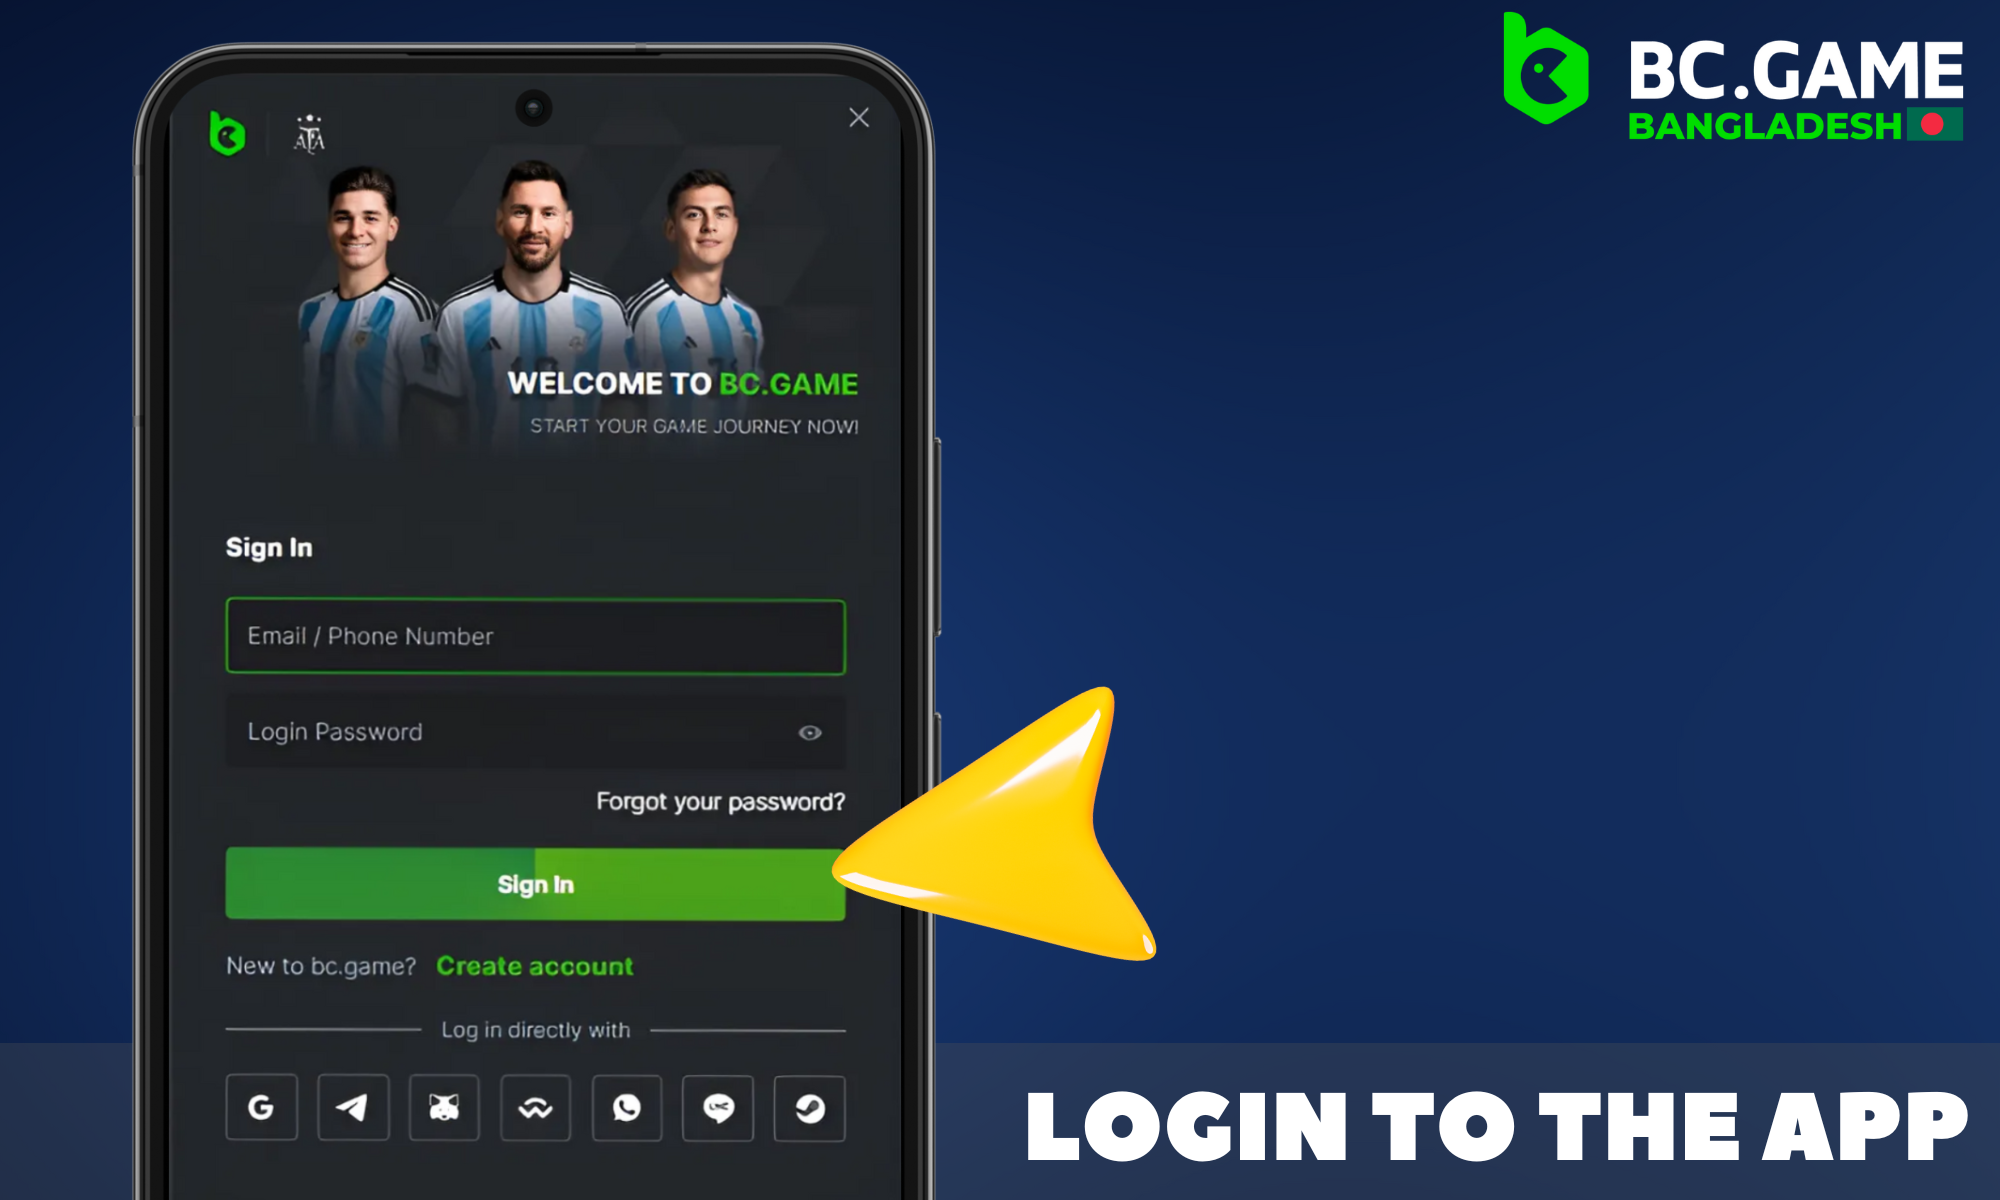 If you already have an account, log in to the BC Game app by clicking on the "Login" button